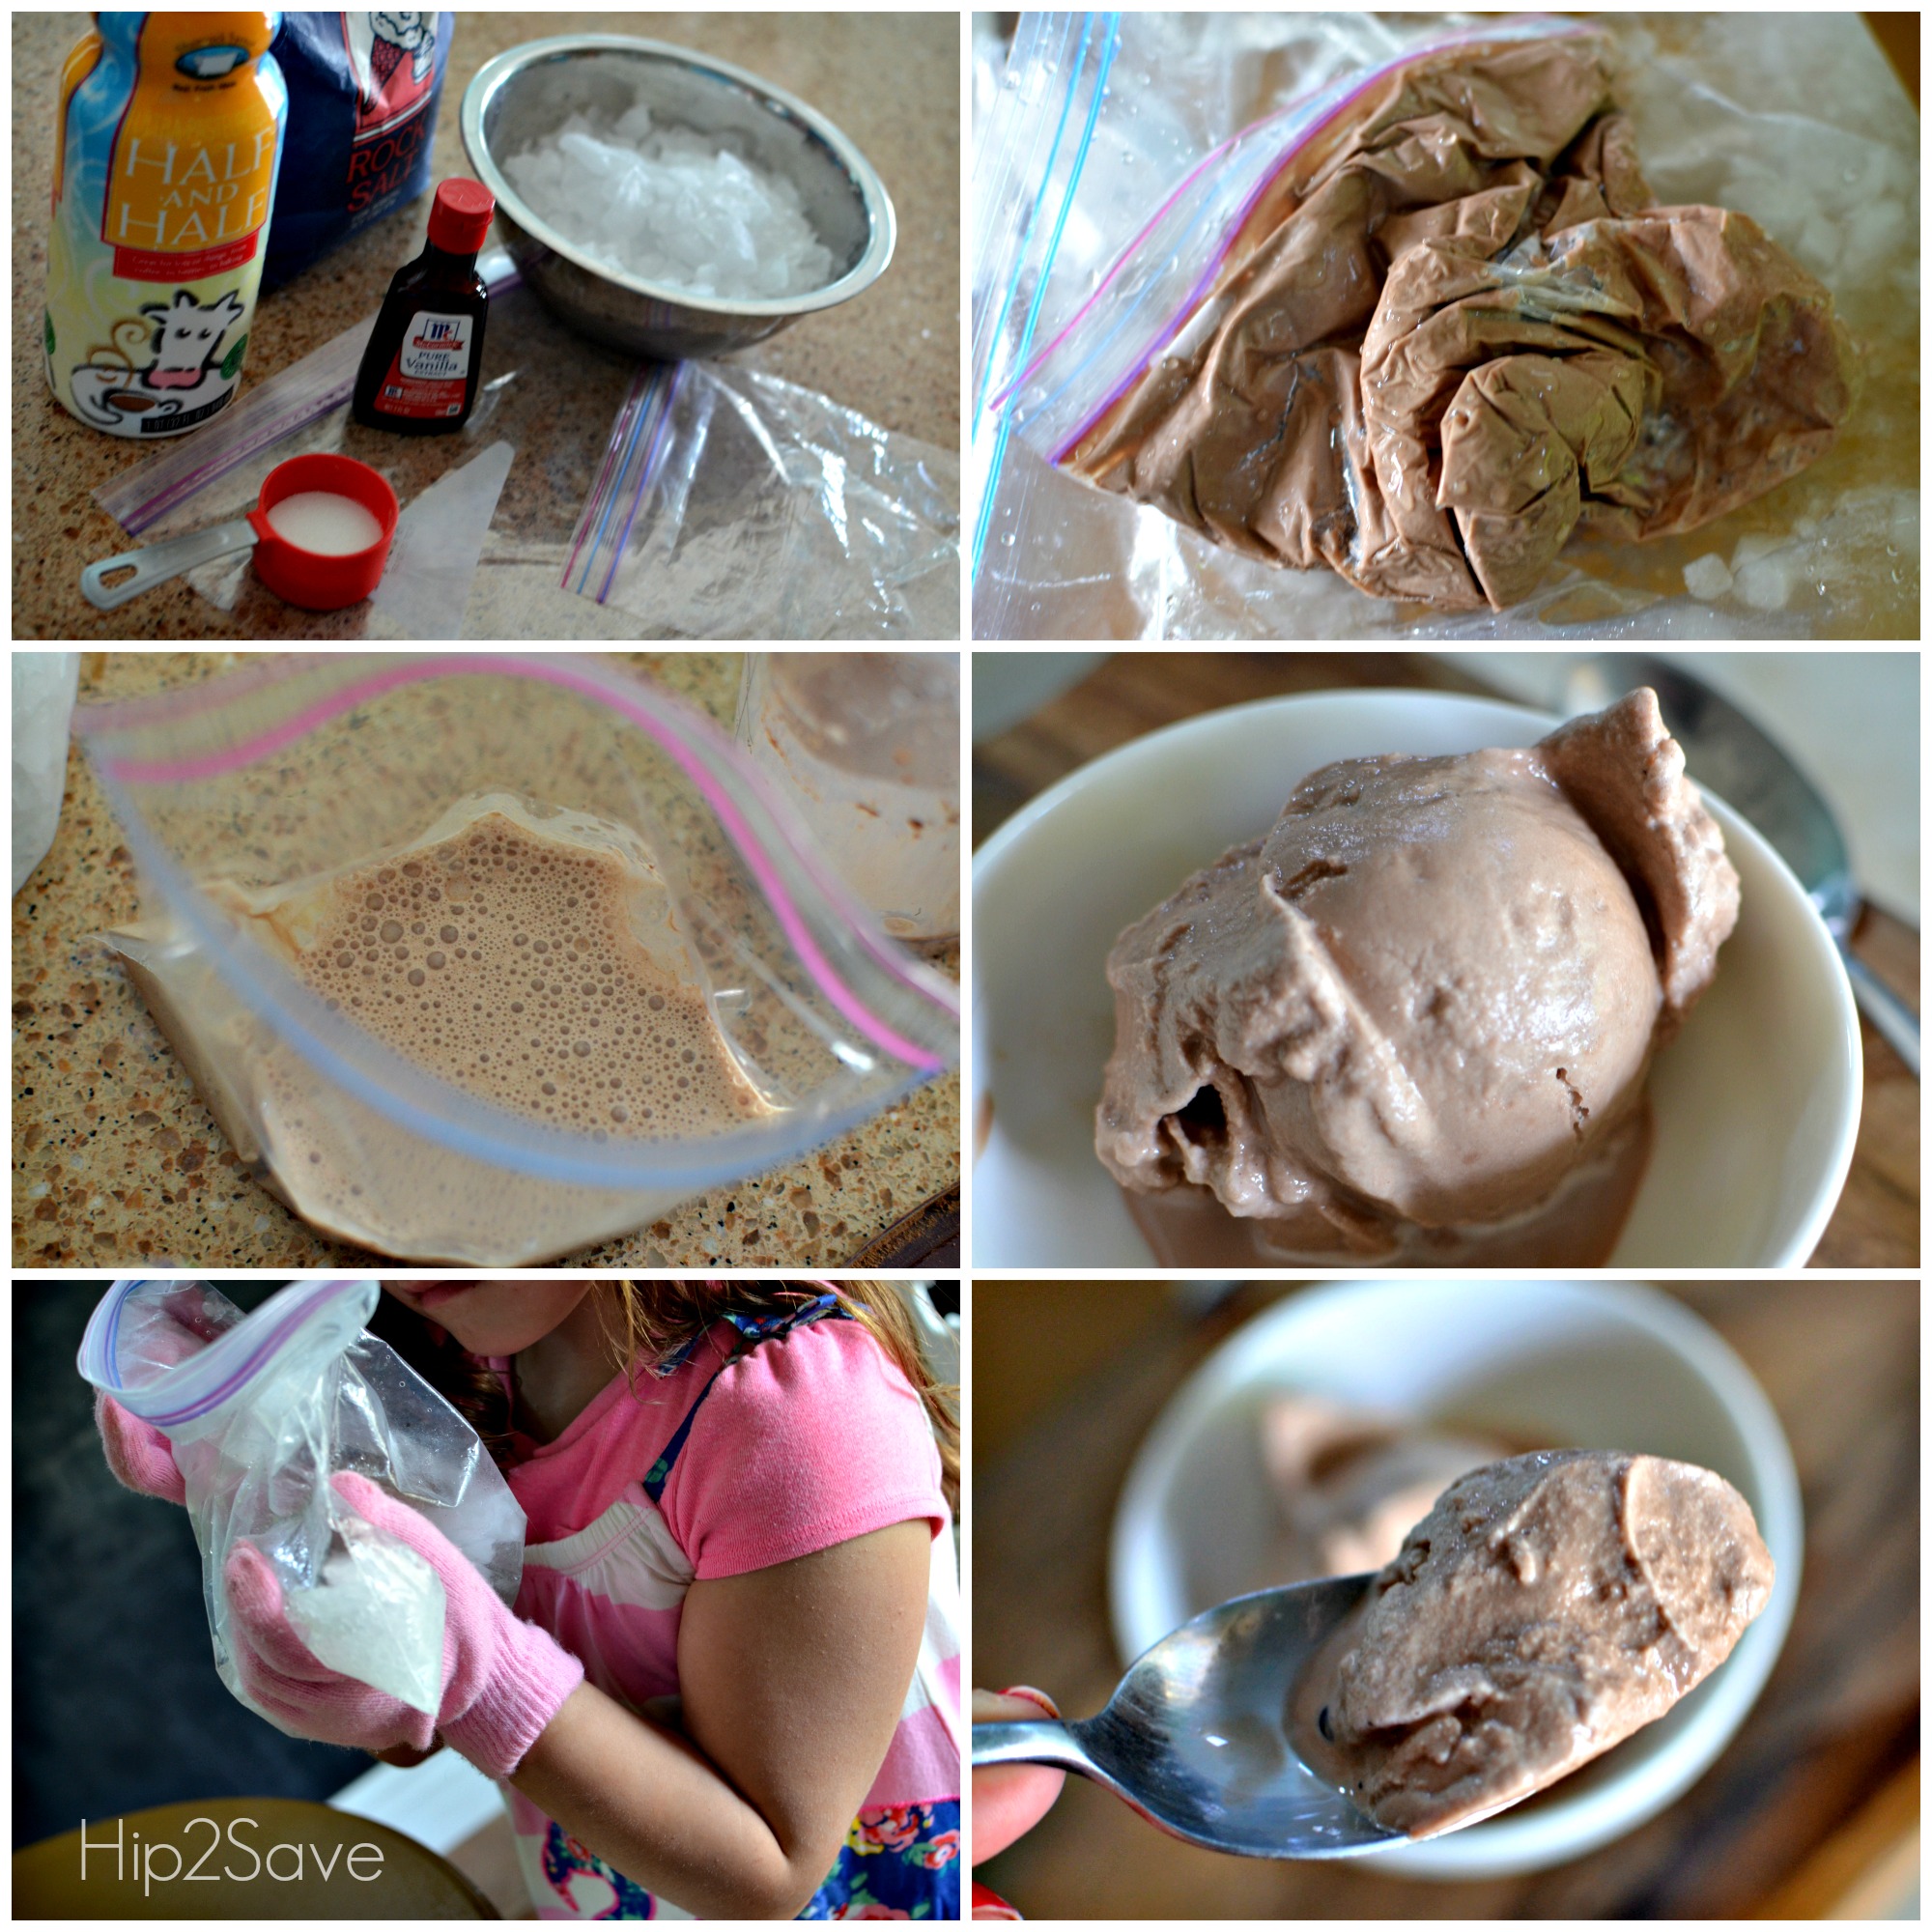 How To Make Ice Cream In A Bag Hip2save